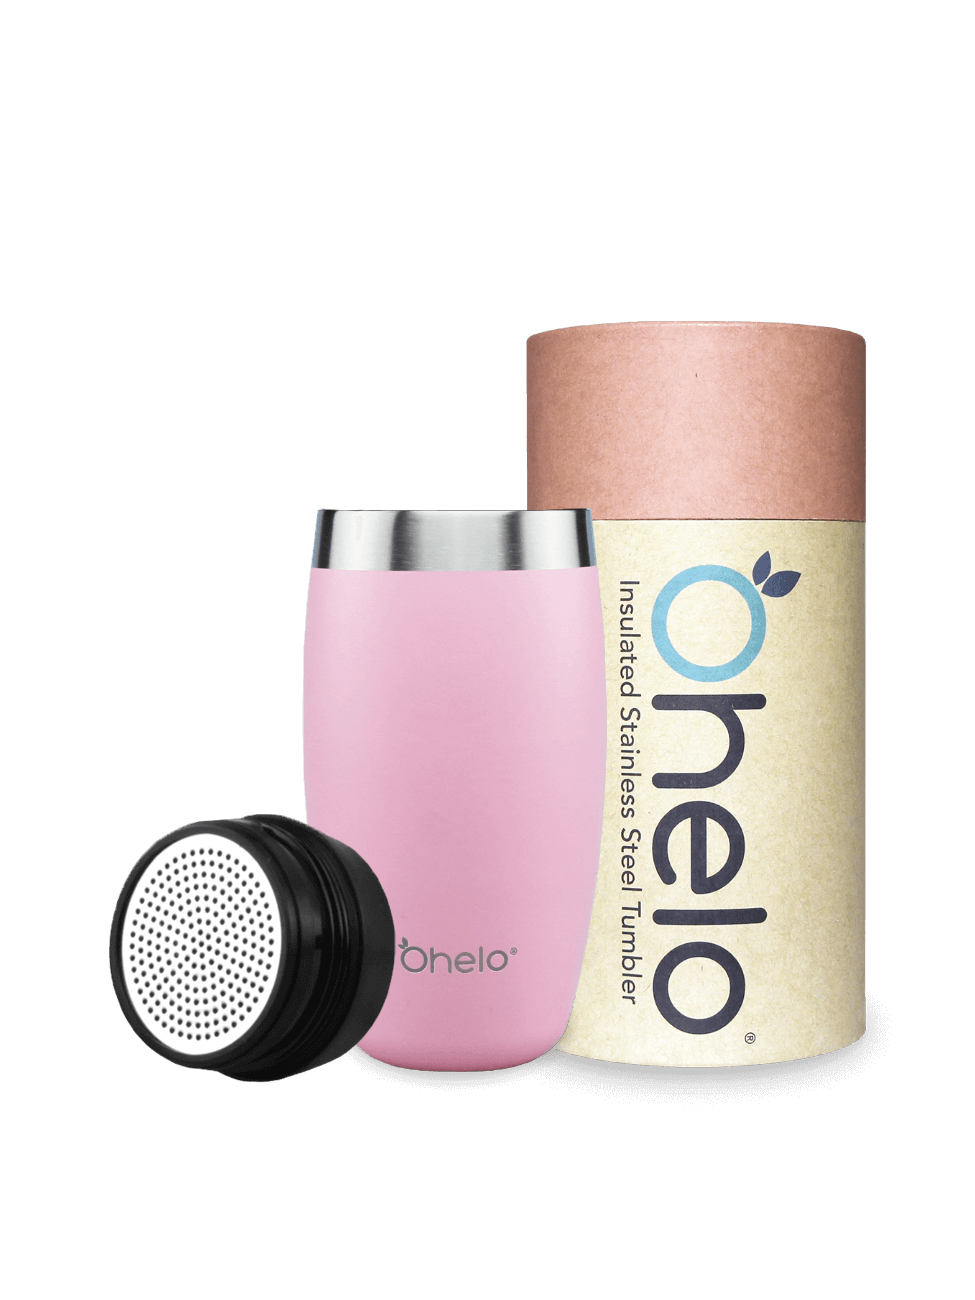 Ohelo dishwasher safe travel mug in pink with removable tea strainer and recycled packaging